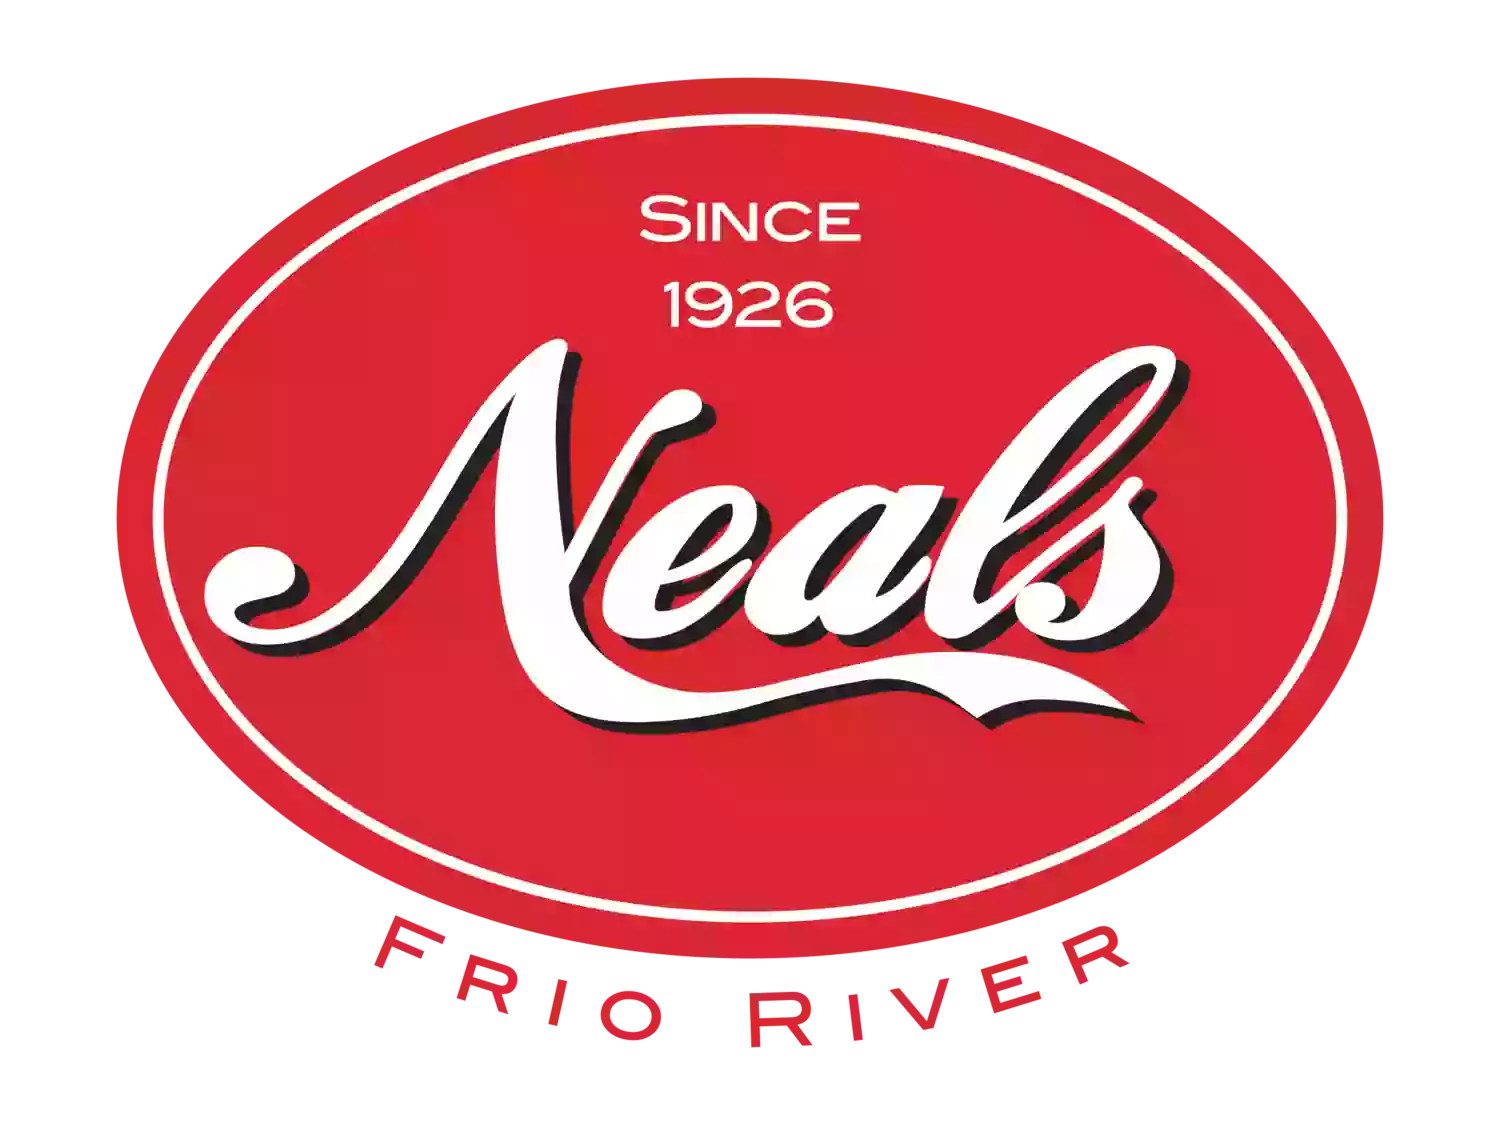 Neal's Lodges